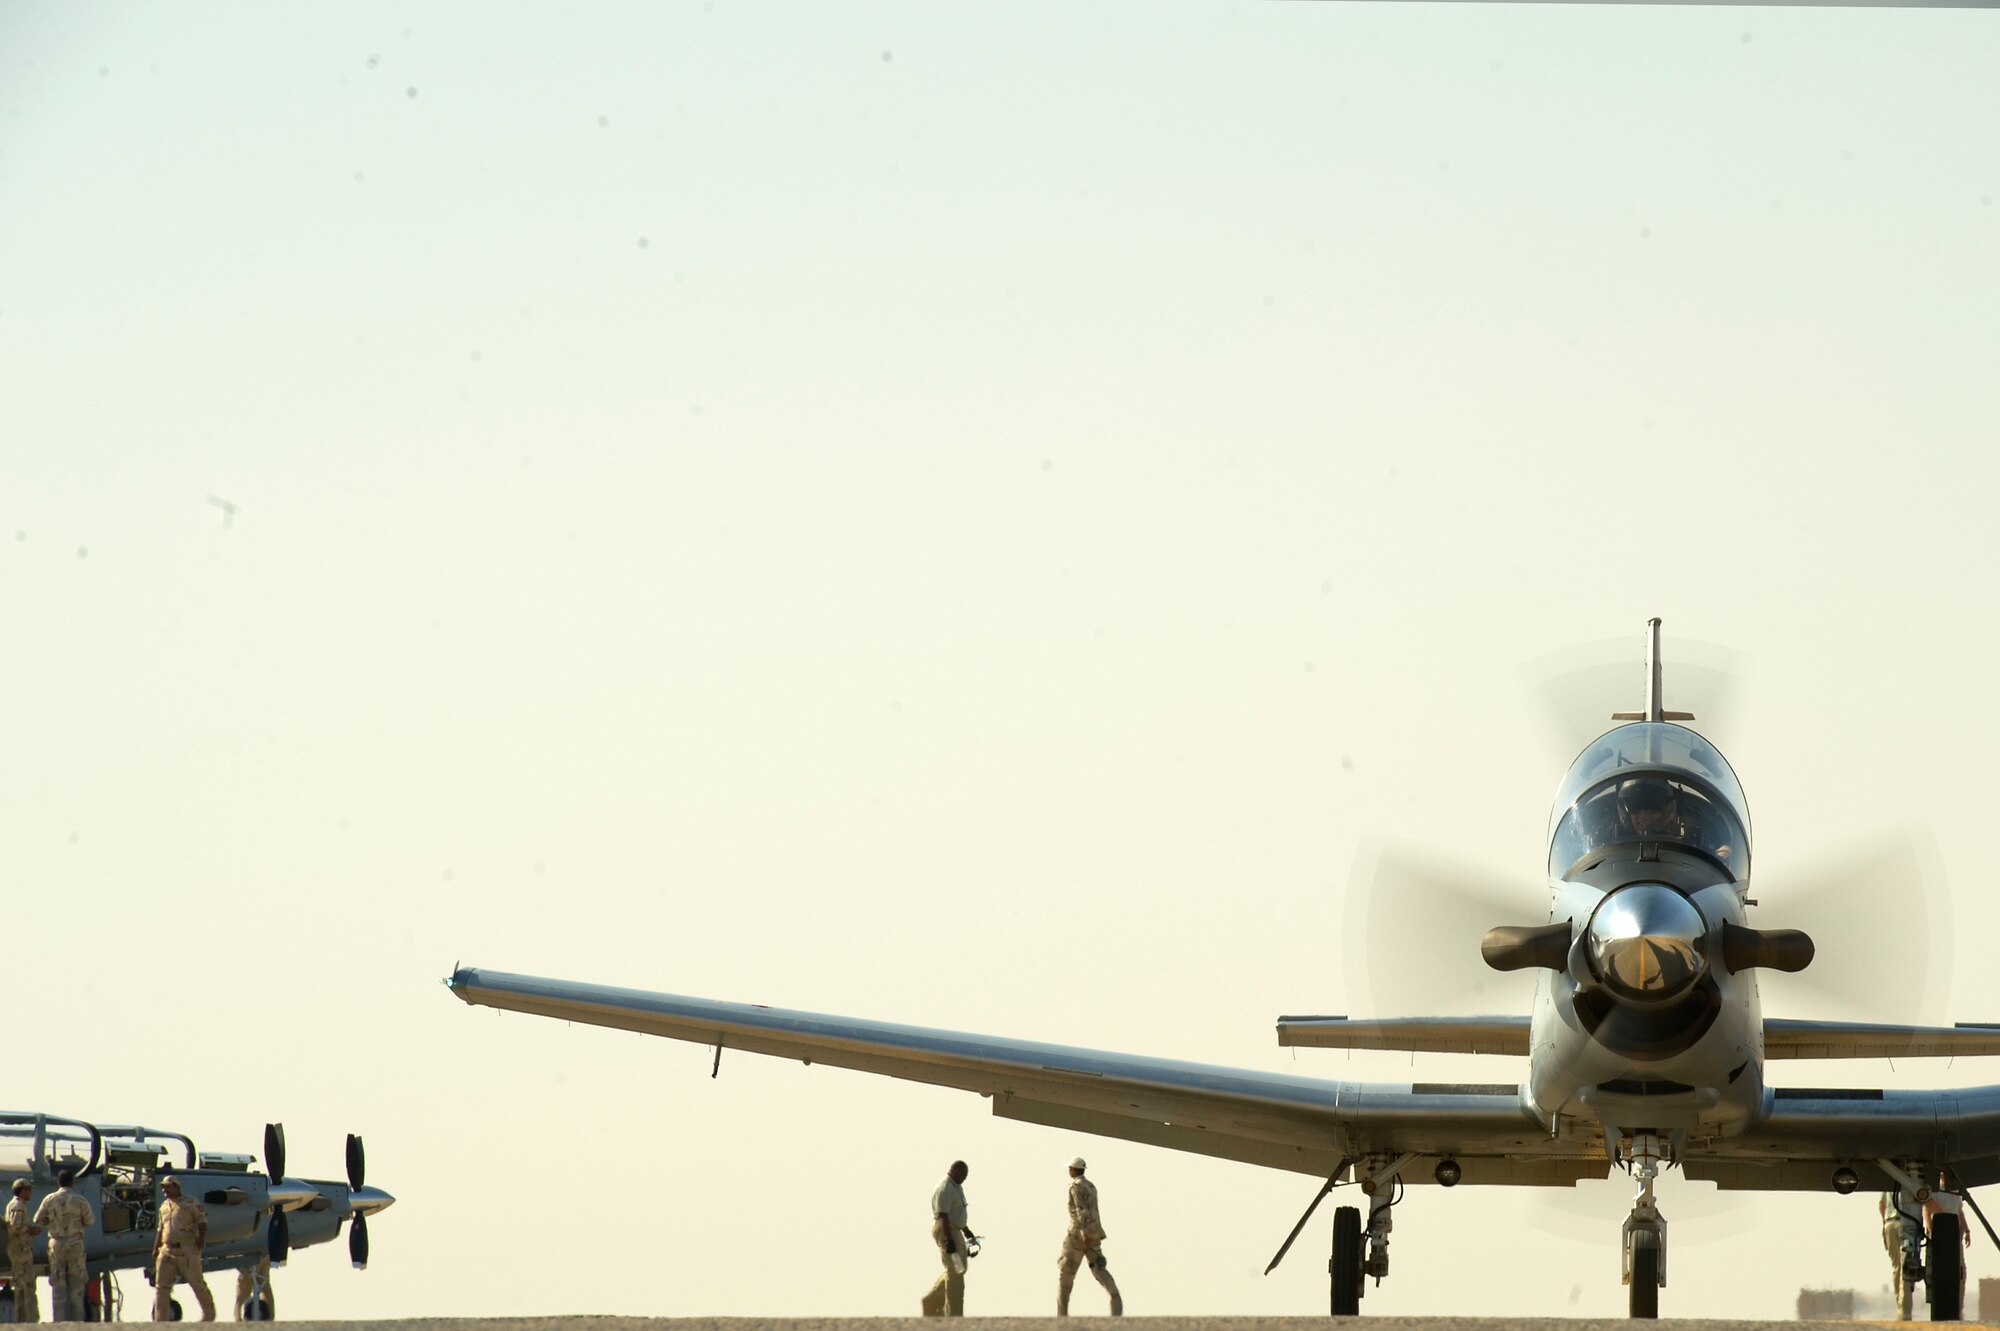 An Iraqi pilot instructor student taxis his T-6 Texan out to the runway at Combat Operating Base Speicher, Tikrit, Iraq on June 29, 2011. Students graduating the course become some of the first U.S. Air Force trained Iraqi instructor pilots. The T-6 is the primary training aircraft of the unit. (U.S. Air Force photo by Staff Sergeant David Salanitri/Released)